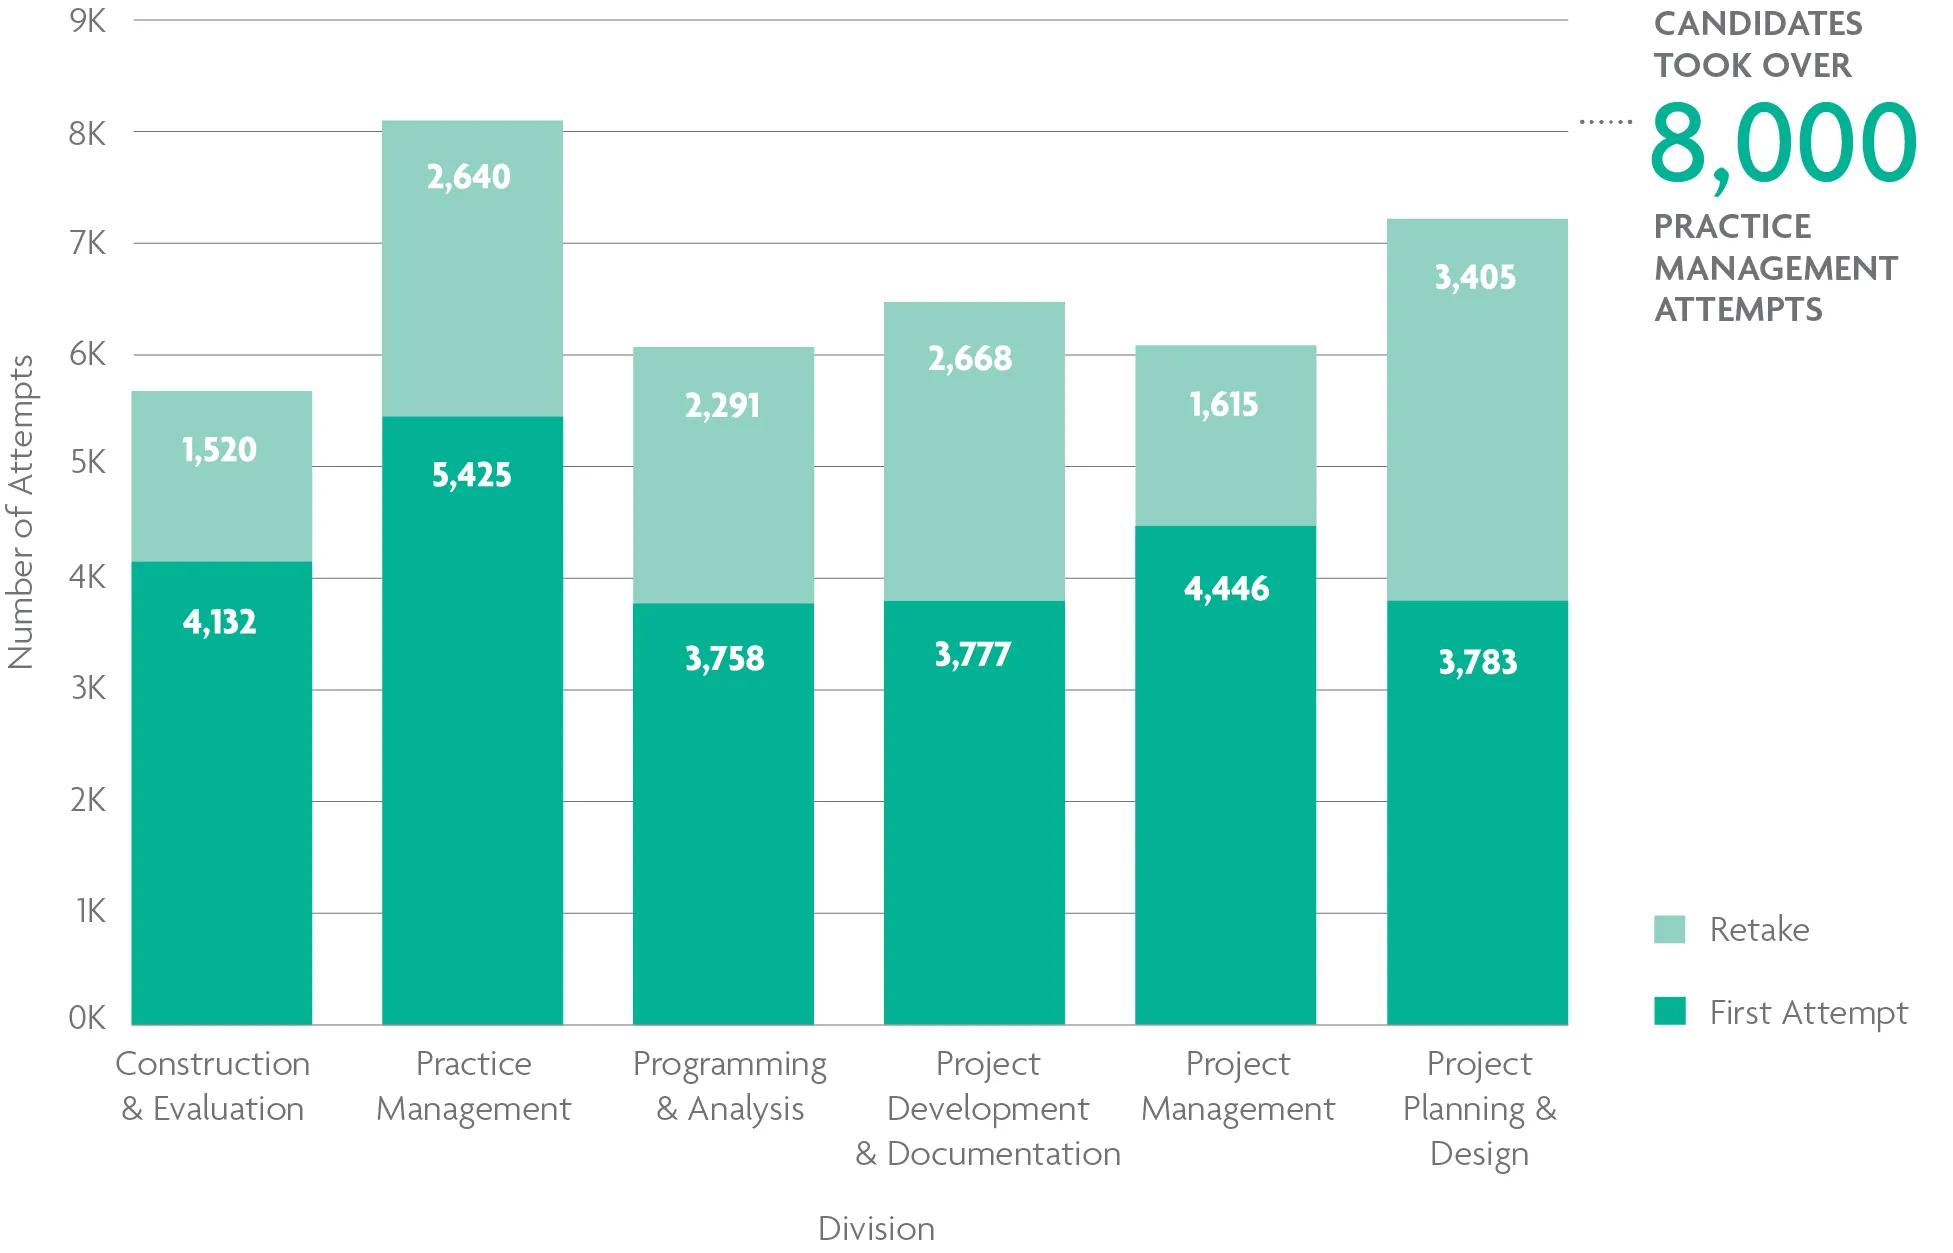 A stacked bar chart shows that candidates tested the most on Practice Management, with over 8,000 division attempts. For help with data accessibility, contact communications@ncarb.org. 